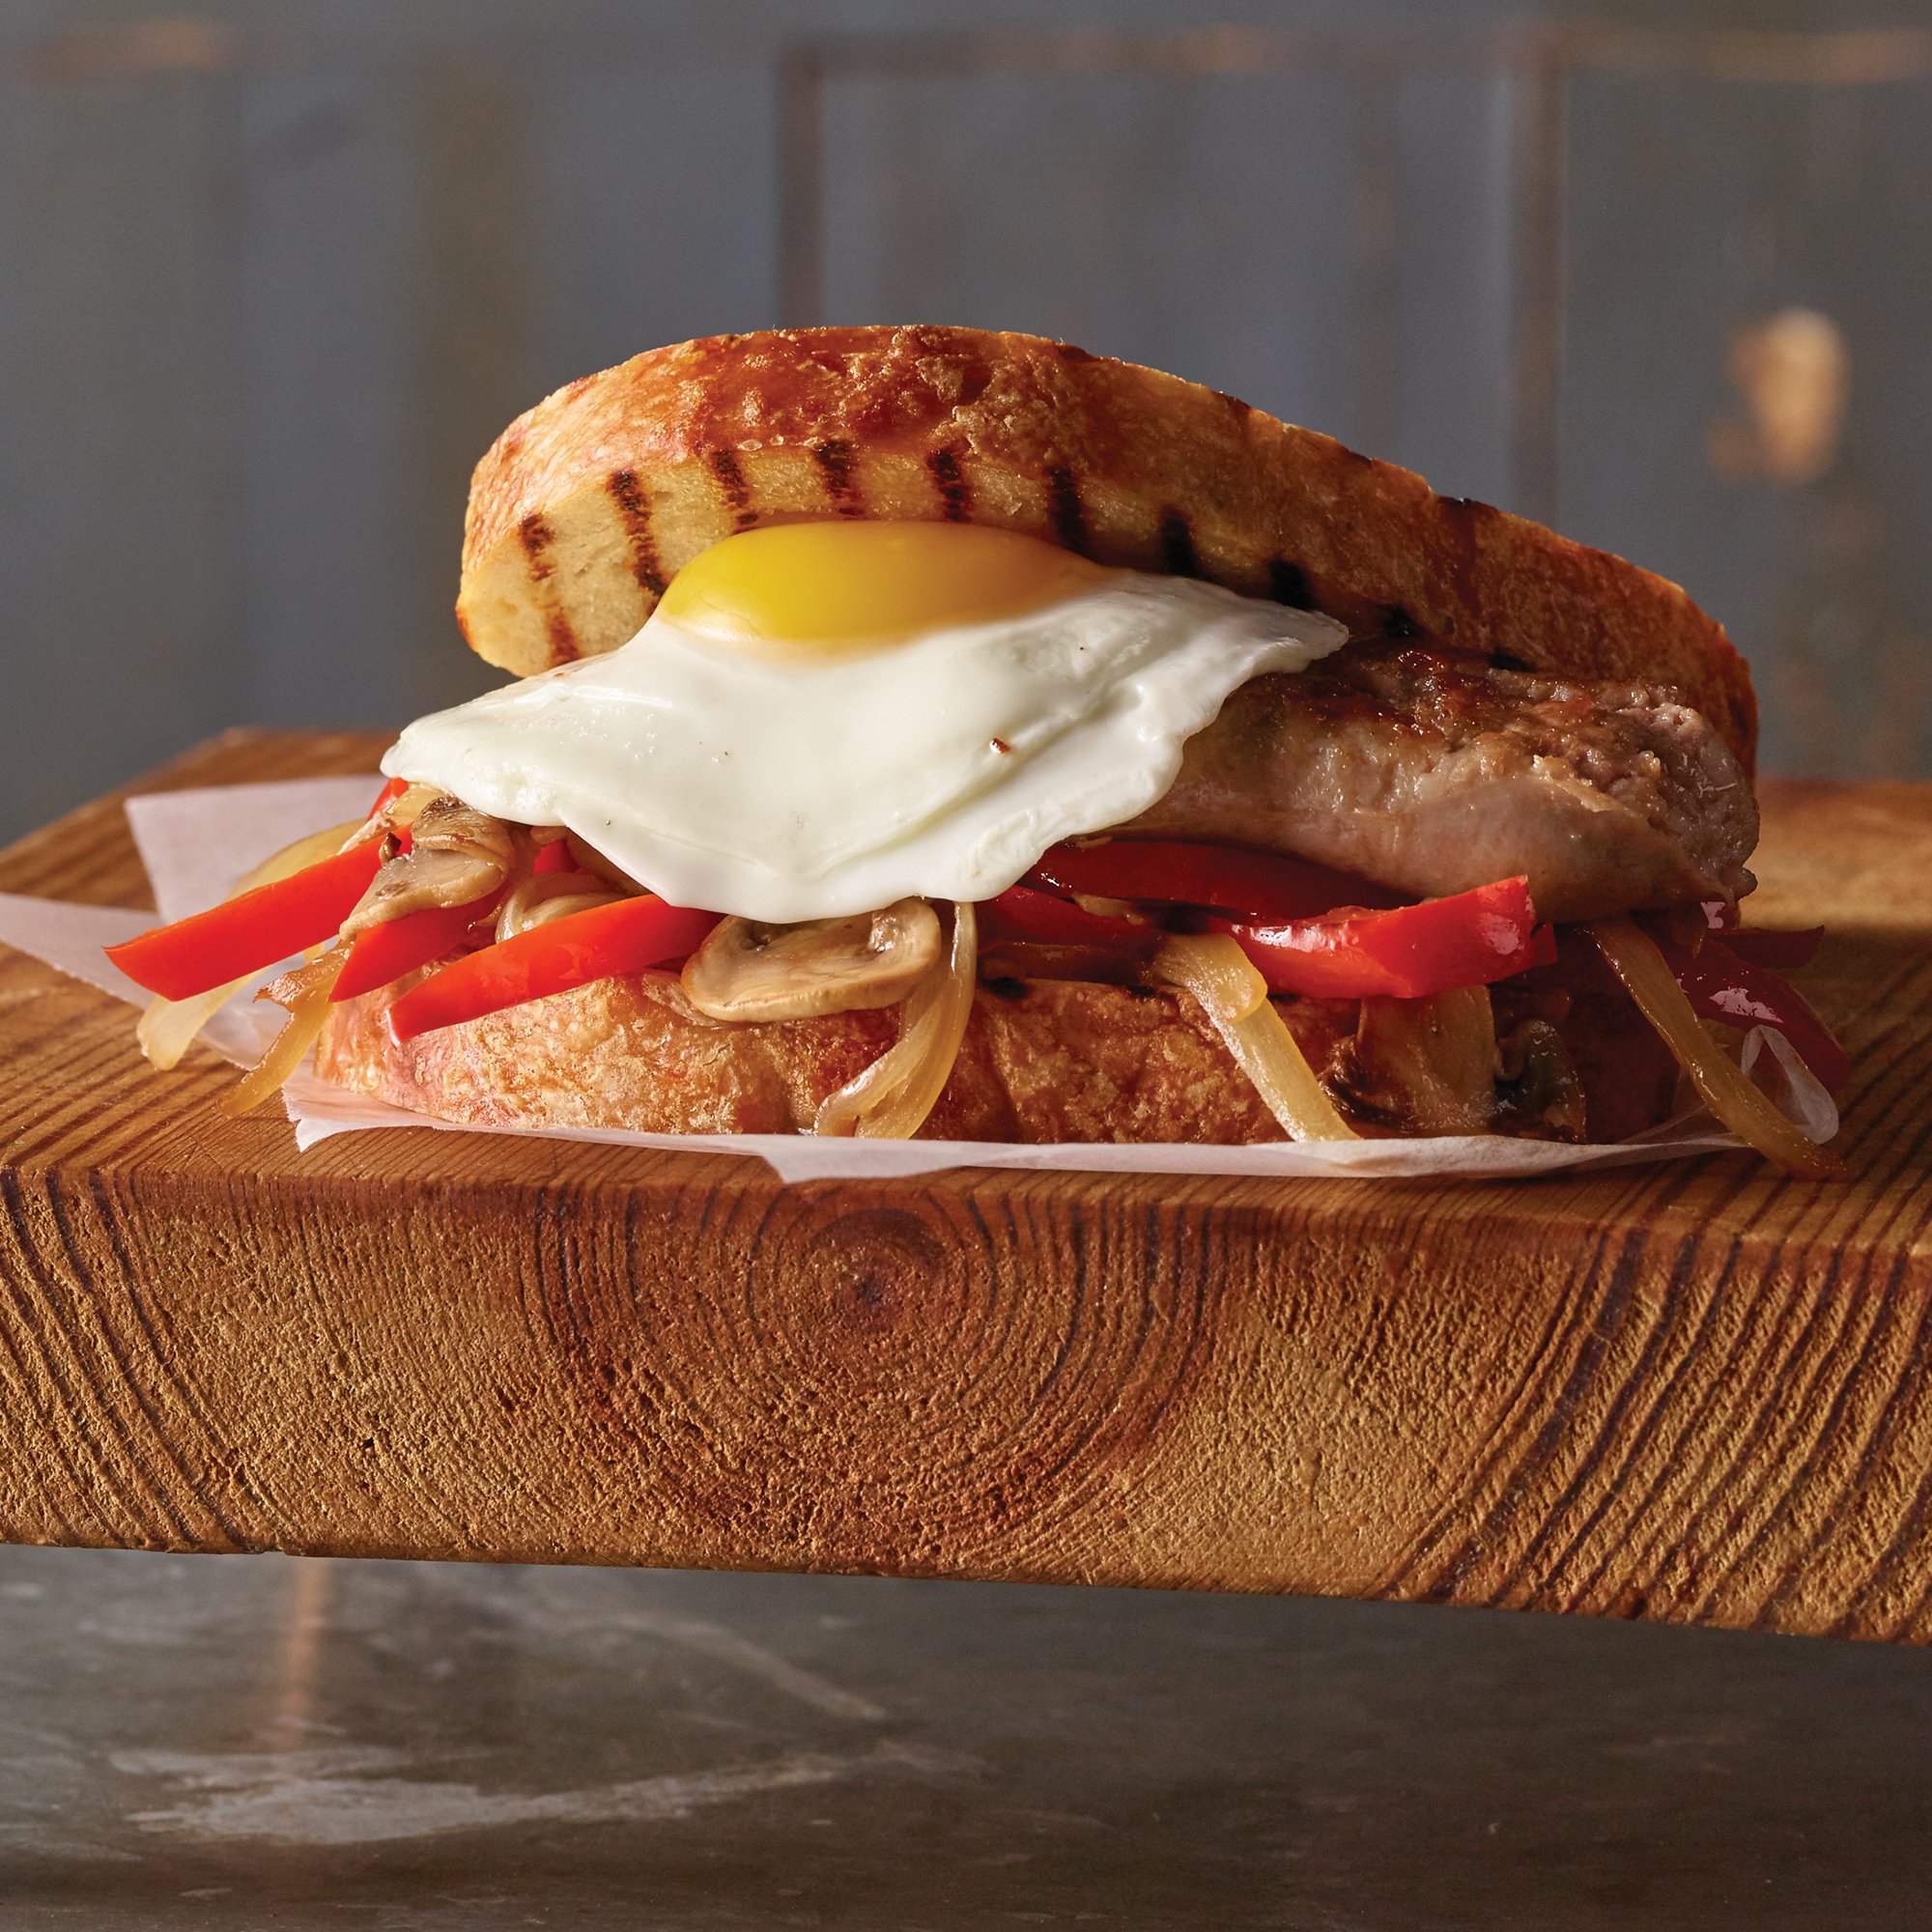 https://images.heb.com/is/image/HEBGrocery/recipe-hm-large/egg-and-italian-sausage-sandwich-recipe.jpg